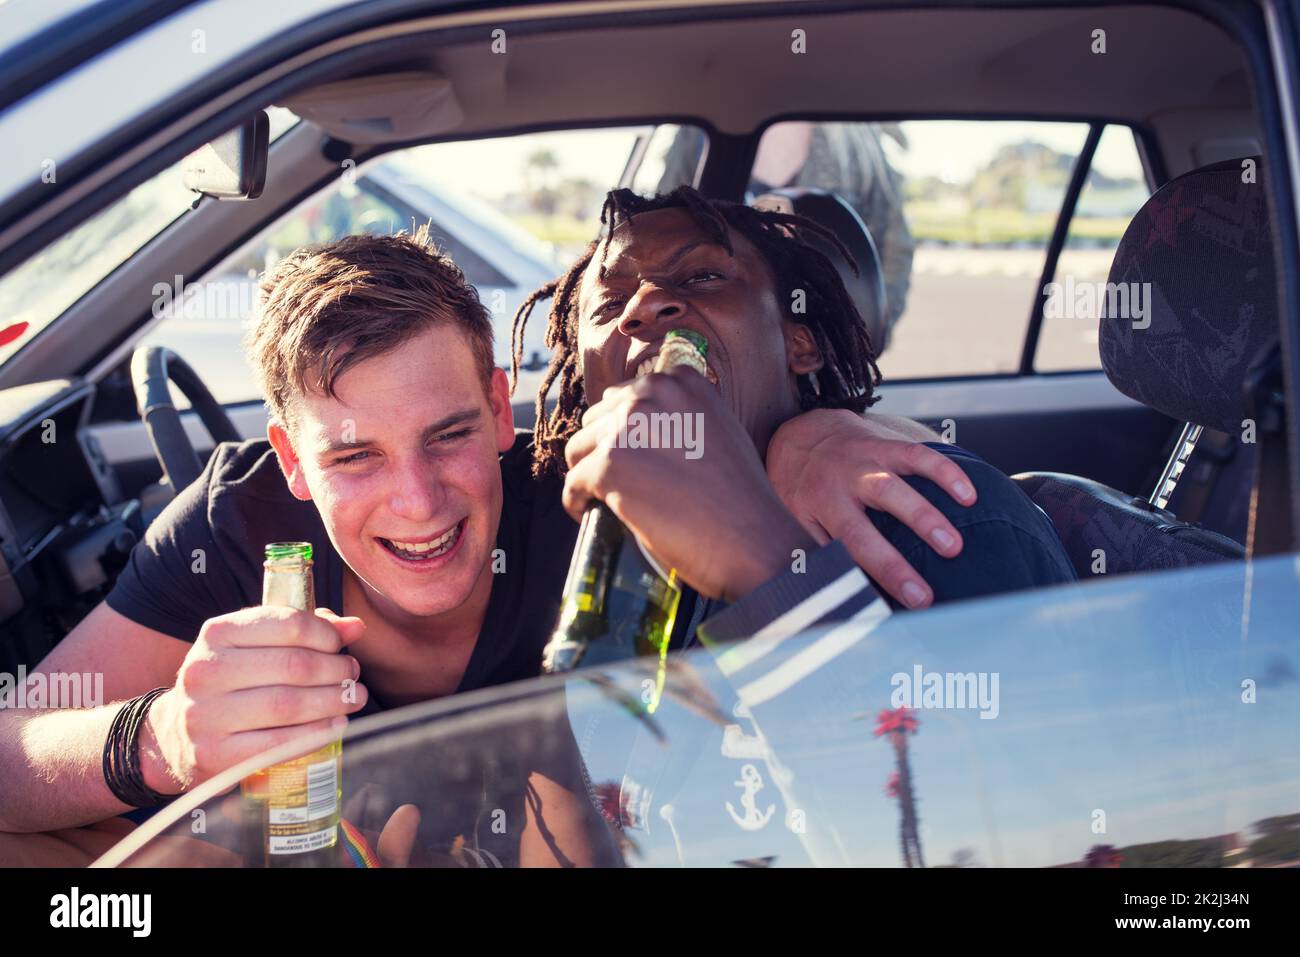 Were drinking, but we aint driving. Real party of guys and girls getting drunk. Stock Photo